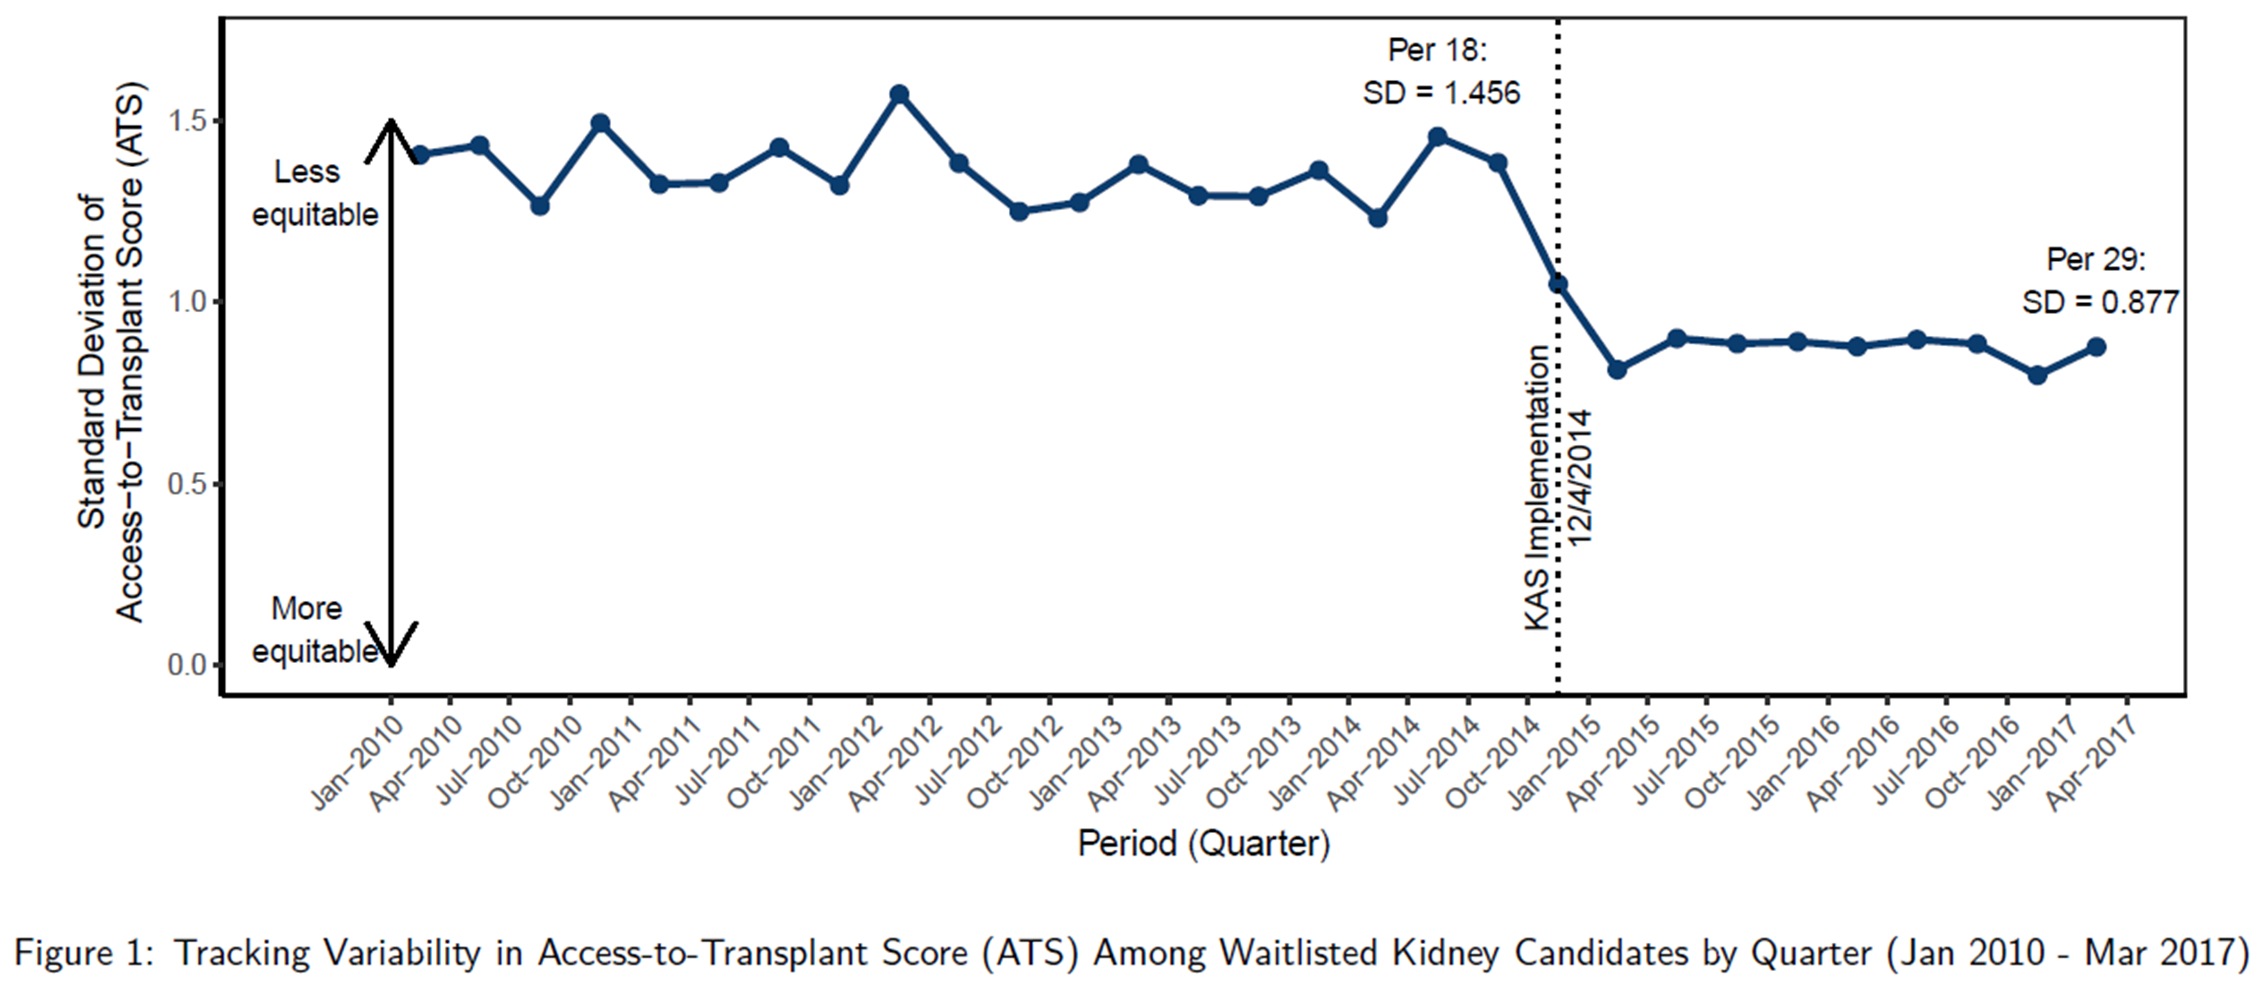 Figure 1: Tracking Variability in Access-to-Transplant Score (ATS) Among Waitlisted Kidney Candidates by Quarter (Jan 2010 - March 2017). Along the x axis, the figure displays period or quarter. Along the y axis, standard deviation of access-to-transplant score (ATS) is charted from values 0 to 2, with 0 representing more equity and 2 representing less equity. In April 2014, per 18 SD equals 1.456. KAS was implemented in December 2014. In January 2017, per 29 SD equals 0.877.